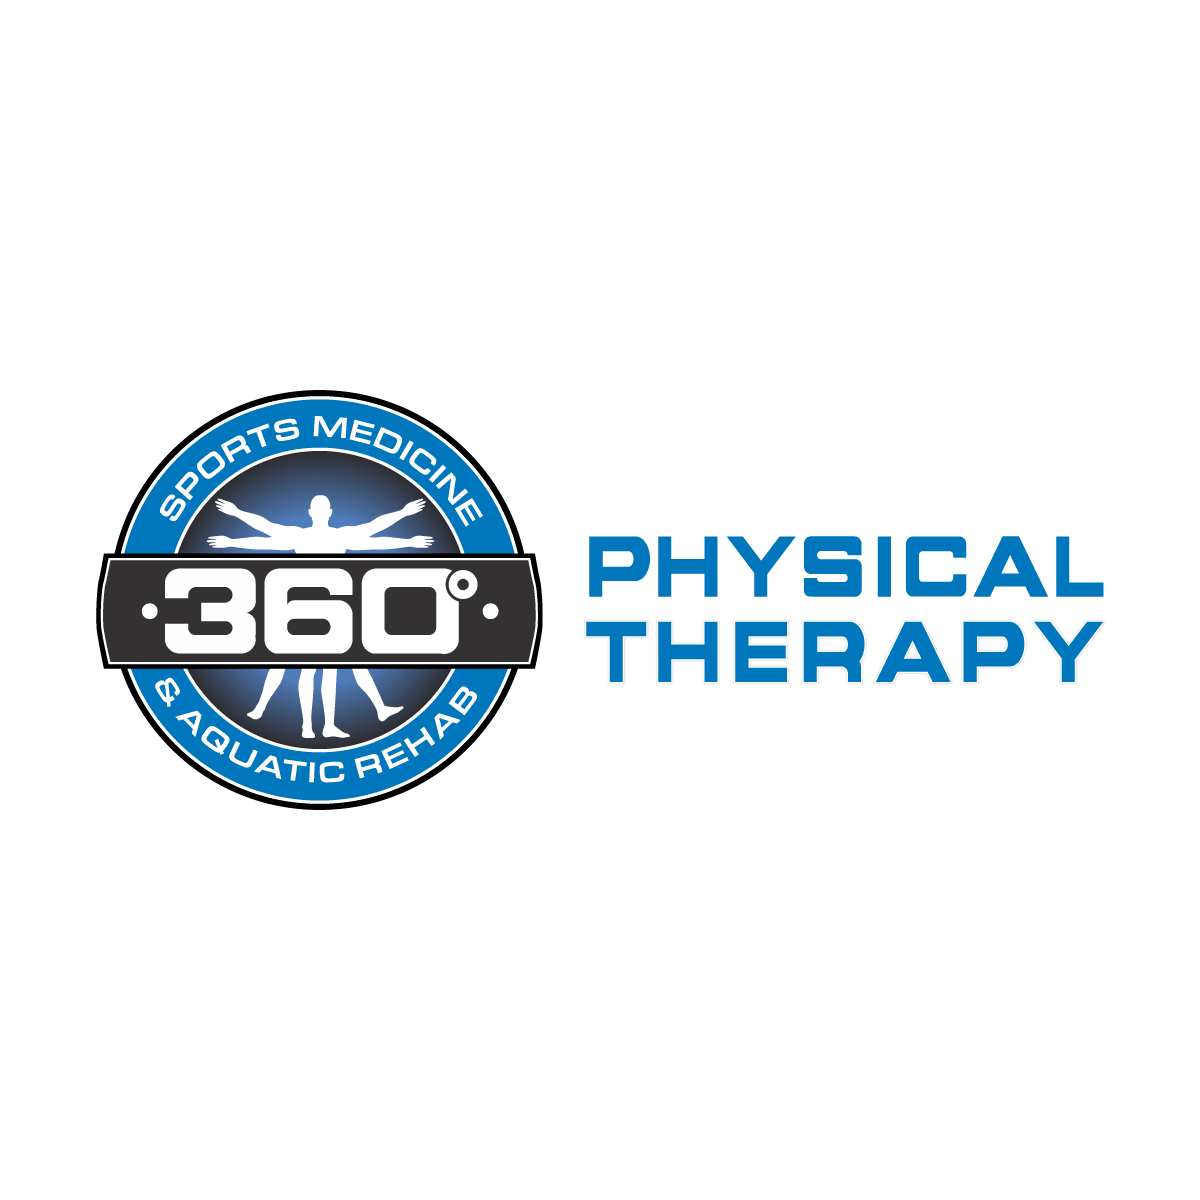 360 Physical Therapy - Scottsdale, McDowell - Scottsdale, AZ 85257 - (480)941-4169 | ShowMeLocal.com